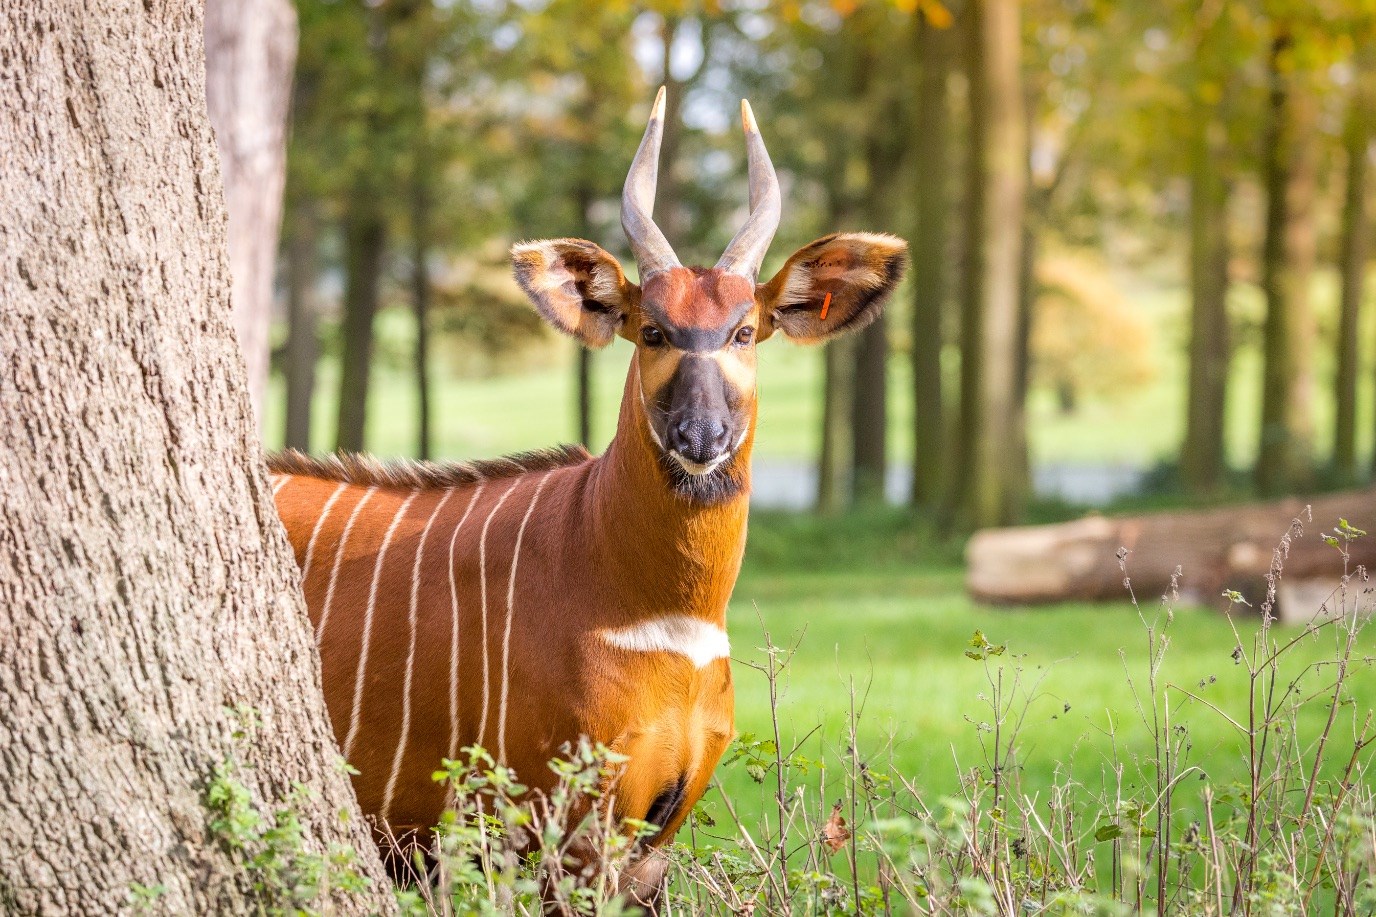 Bongo peeks out from behind tree and looks at camera against a blurred forest background with trees and grass 